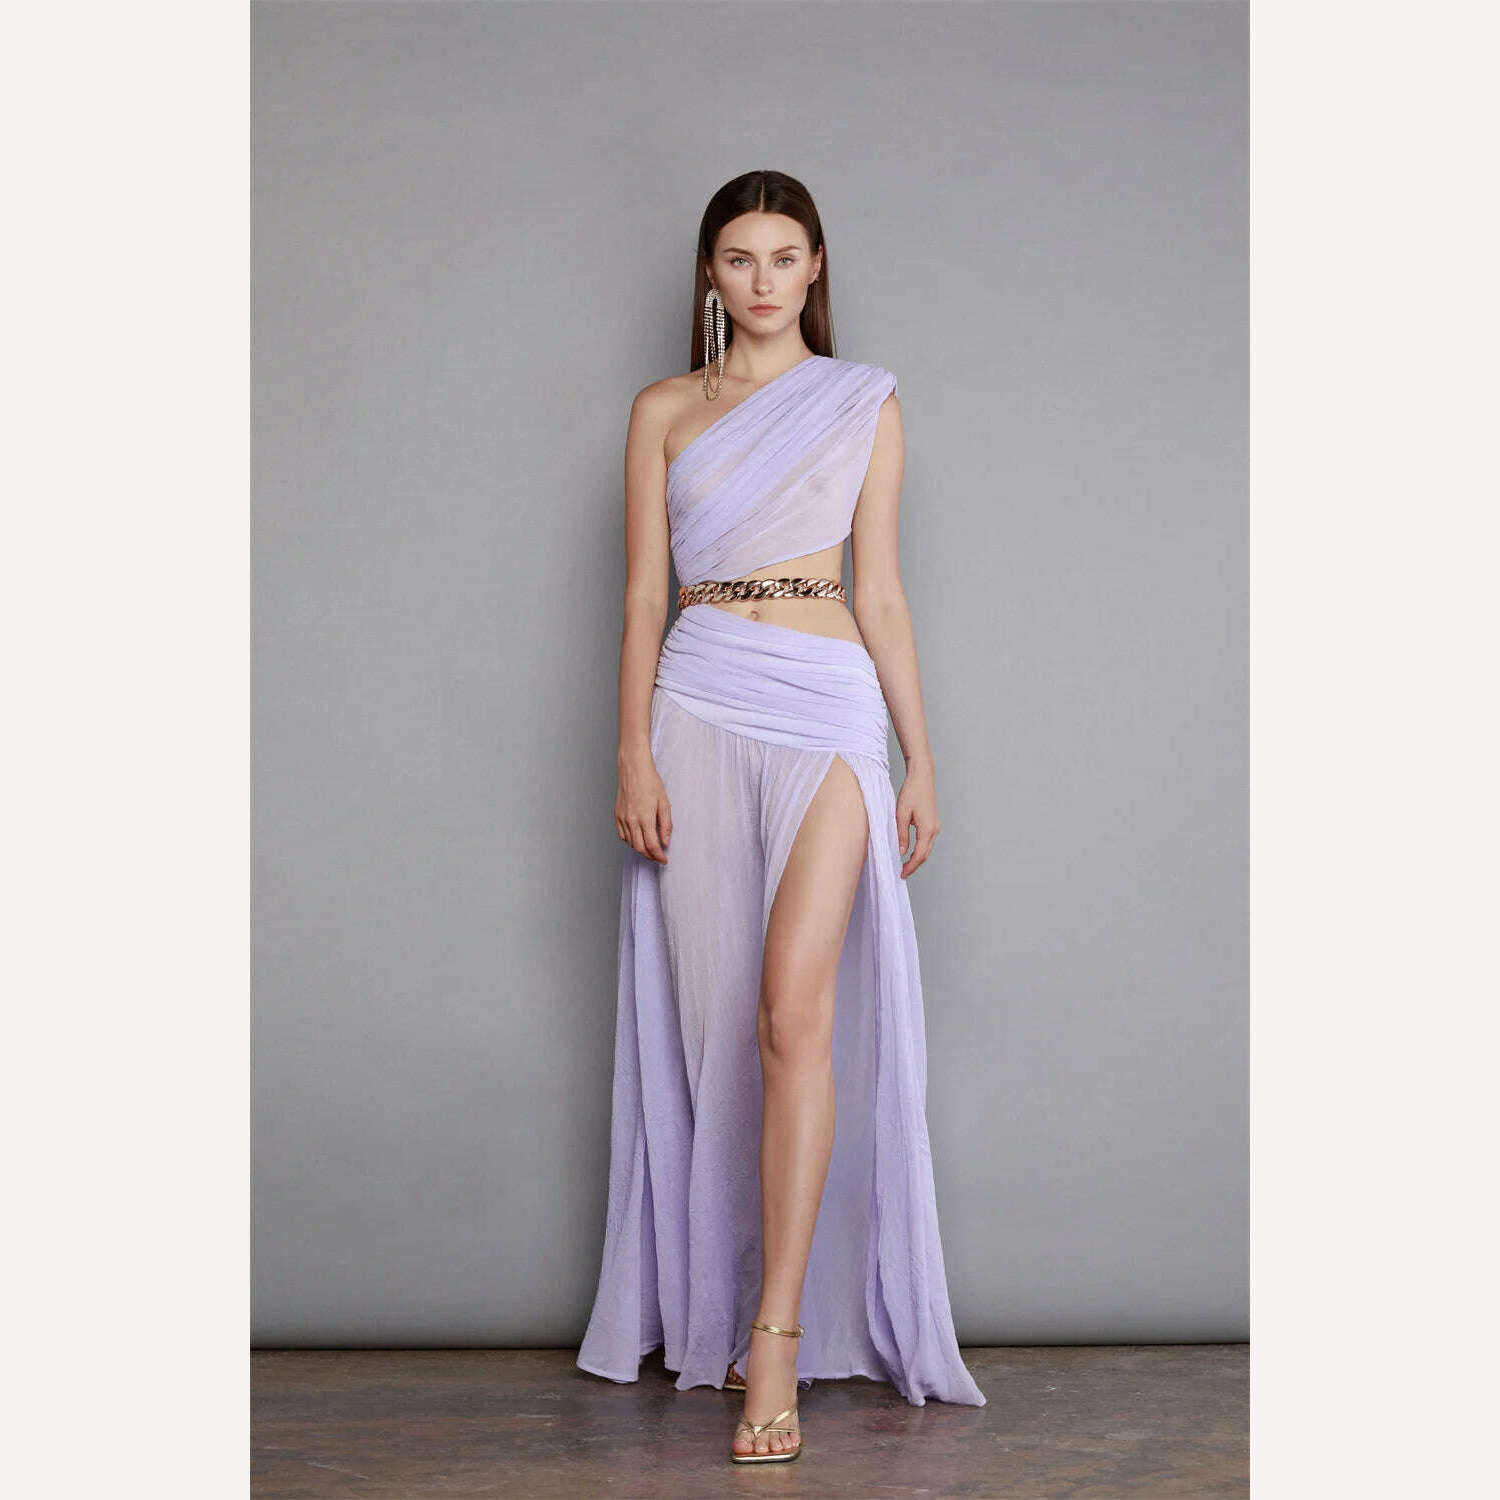 KIMLUD, New Summer Violet Color Sexy One Shoulder Golden Chain EXpose Waist High Split Floor Lenght Dress Celebrity Evening Party Outfit, Lavender / XS, KIMLUD Womens Clothes